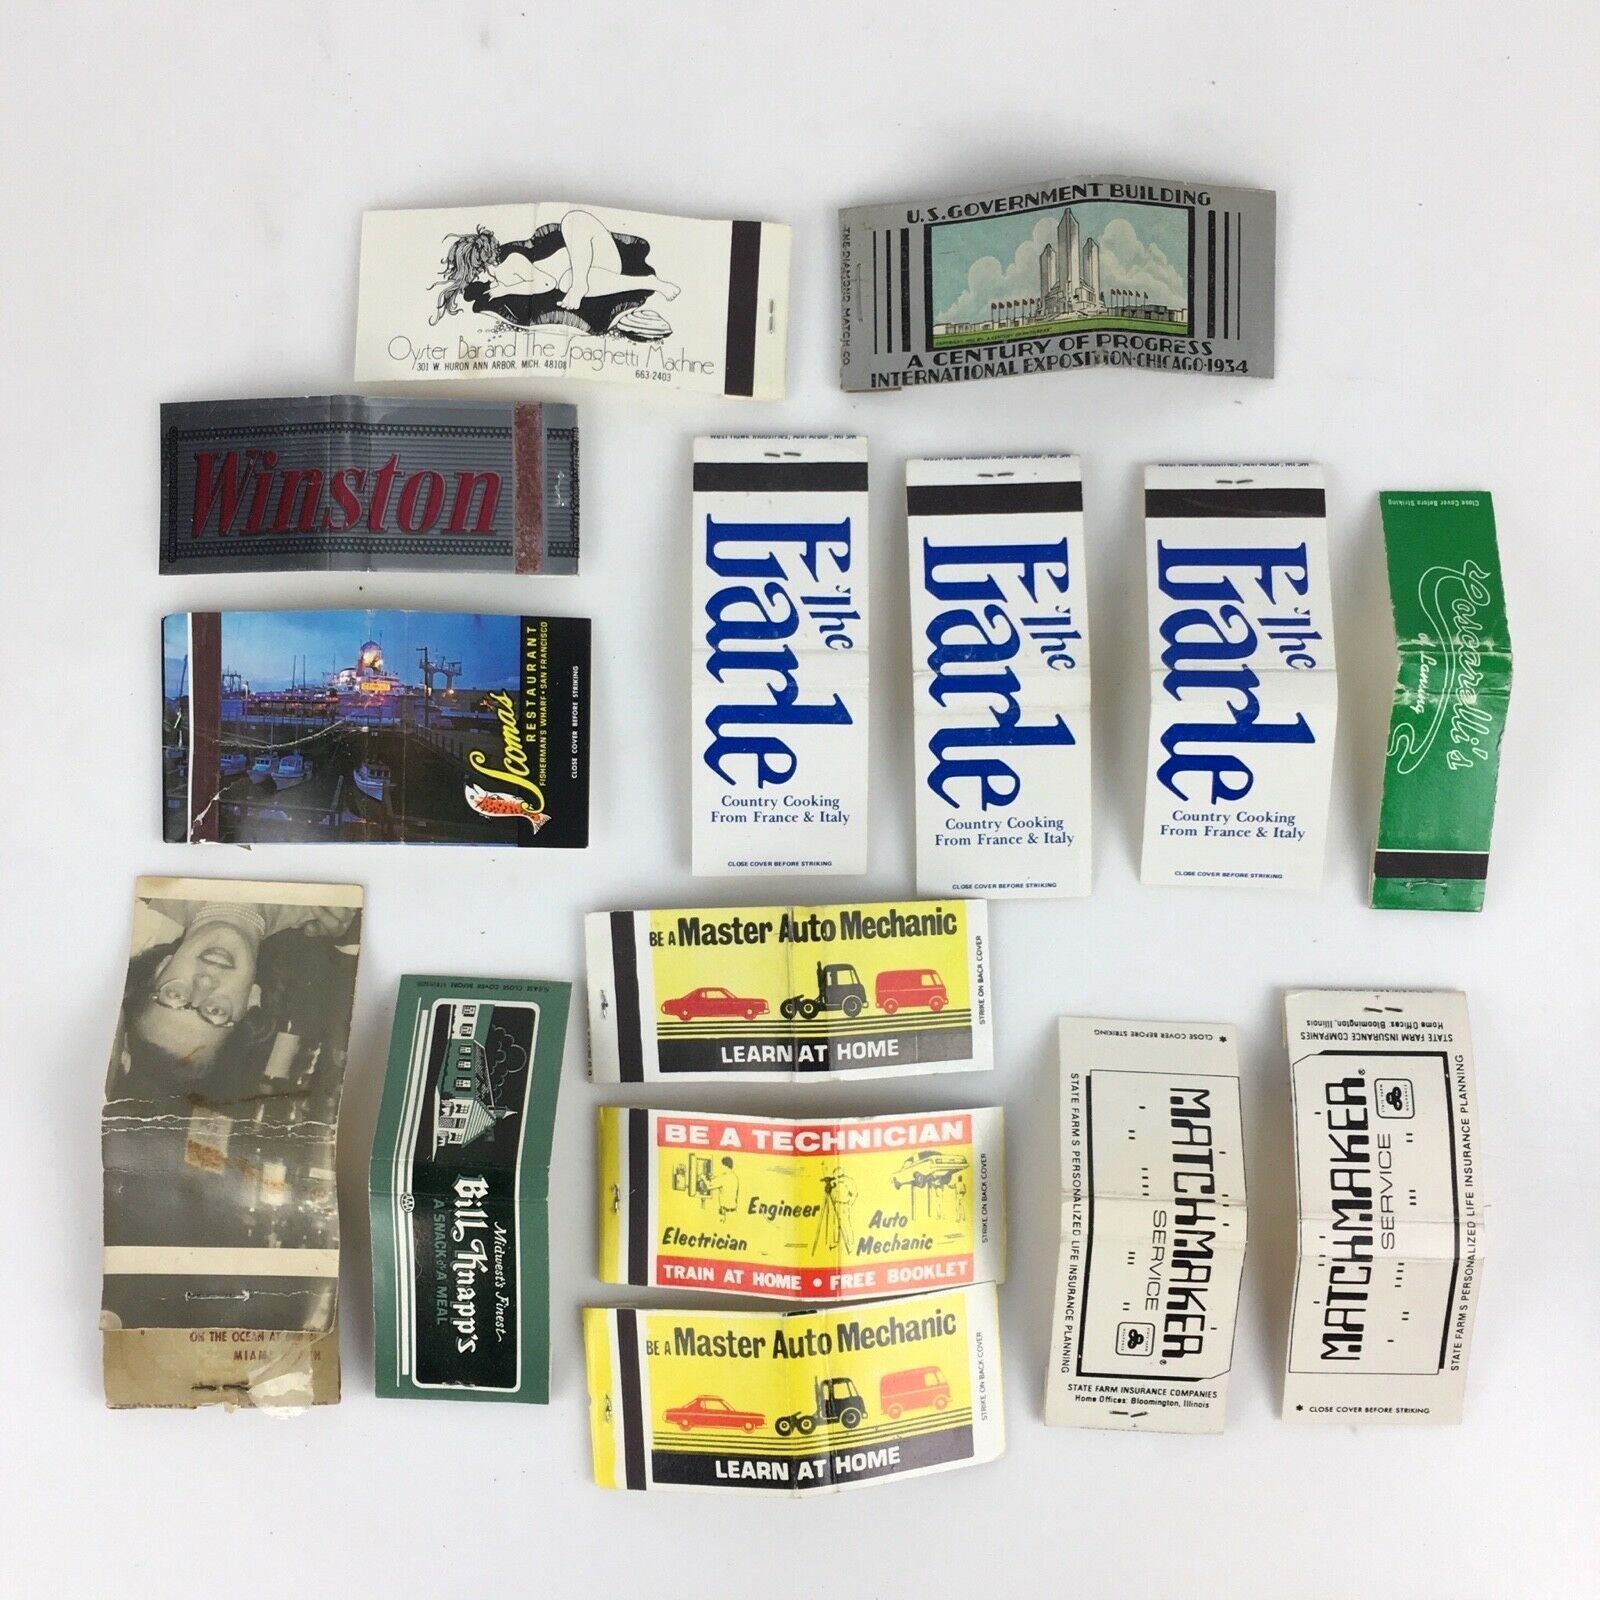 Lot 15 Double Two Sided Printed Match Stems Matchbook Covers Advertising Vintage